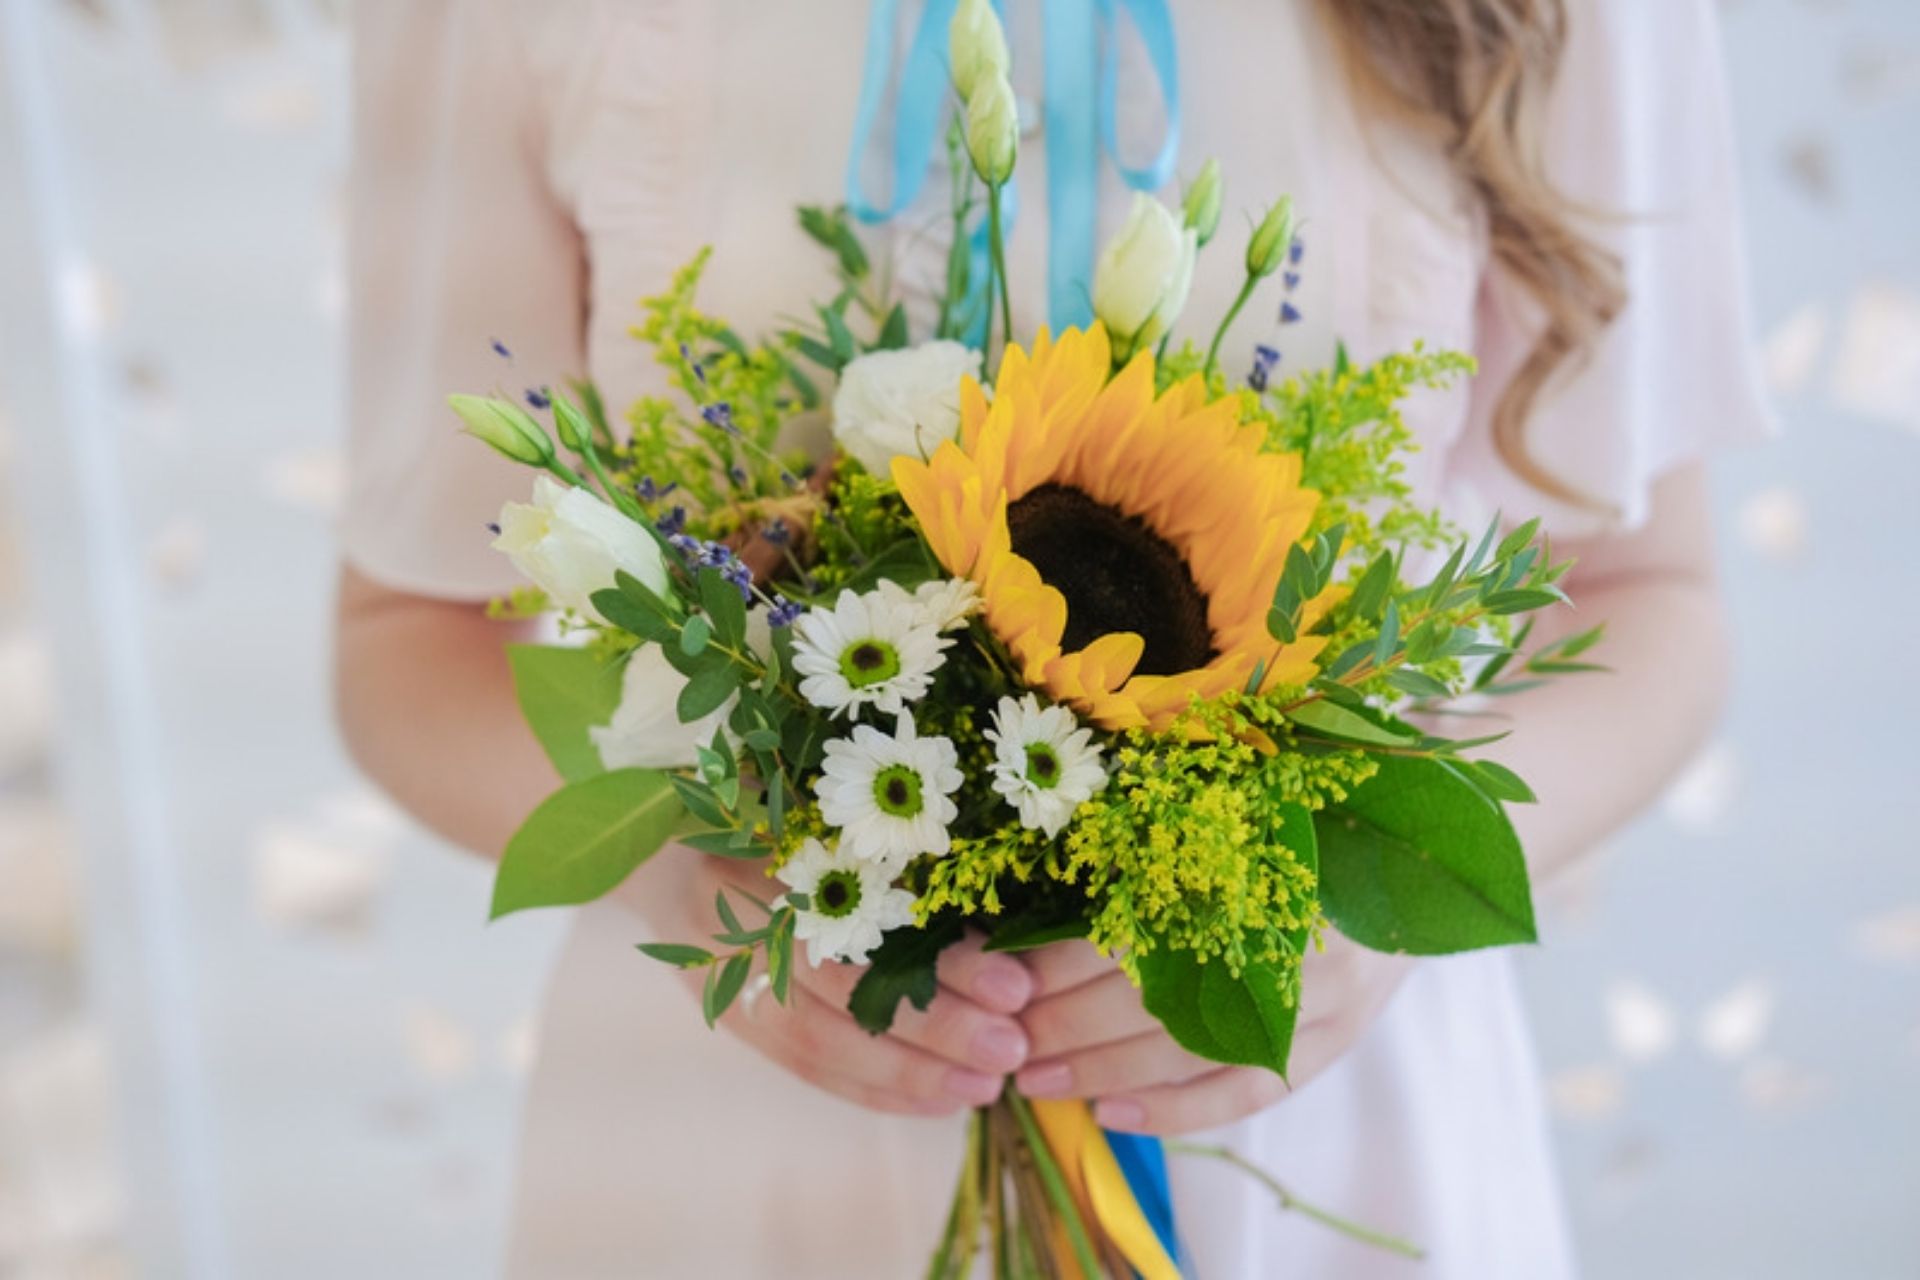 6 Amazing Reasons To Gift Flowers In 2021